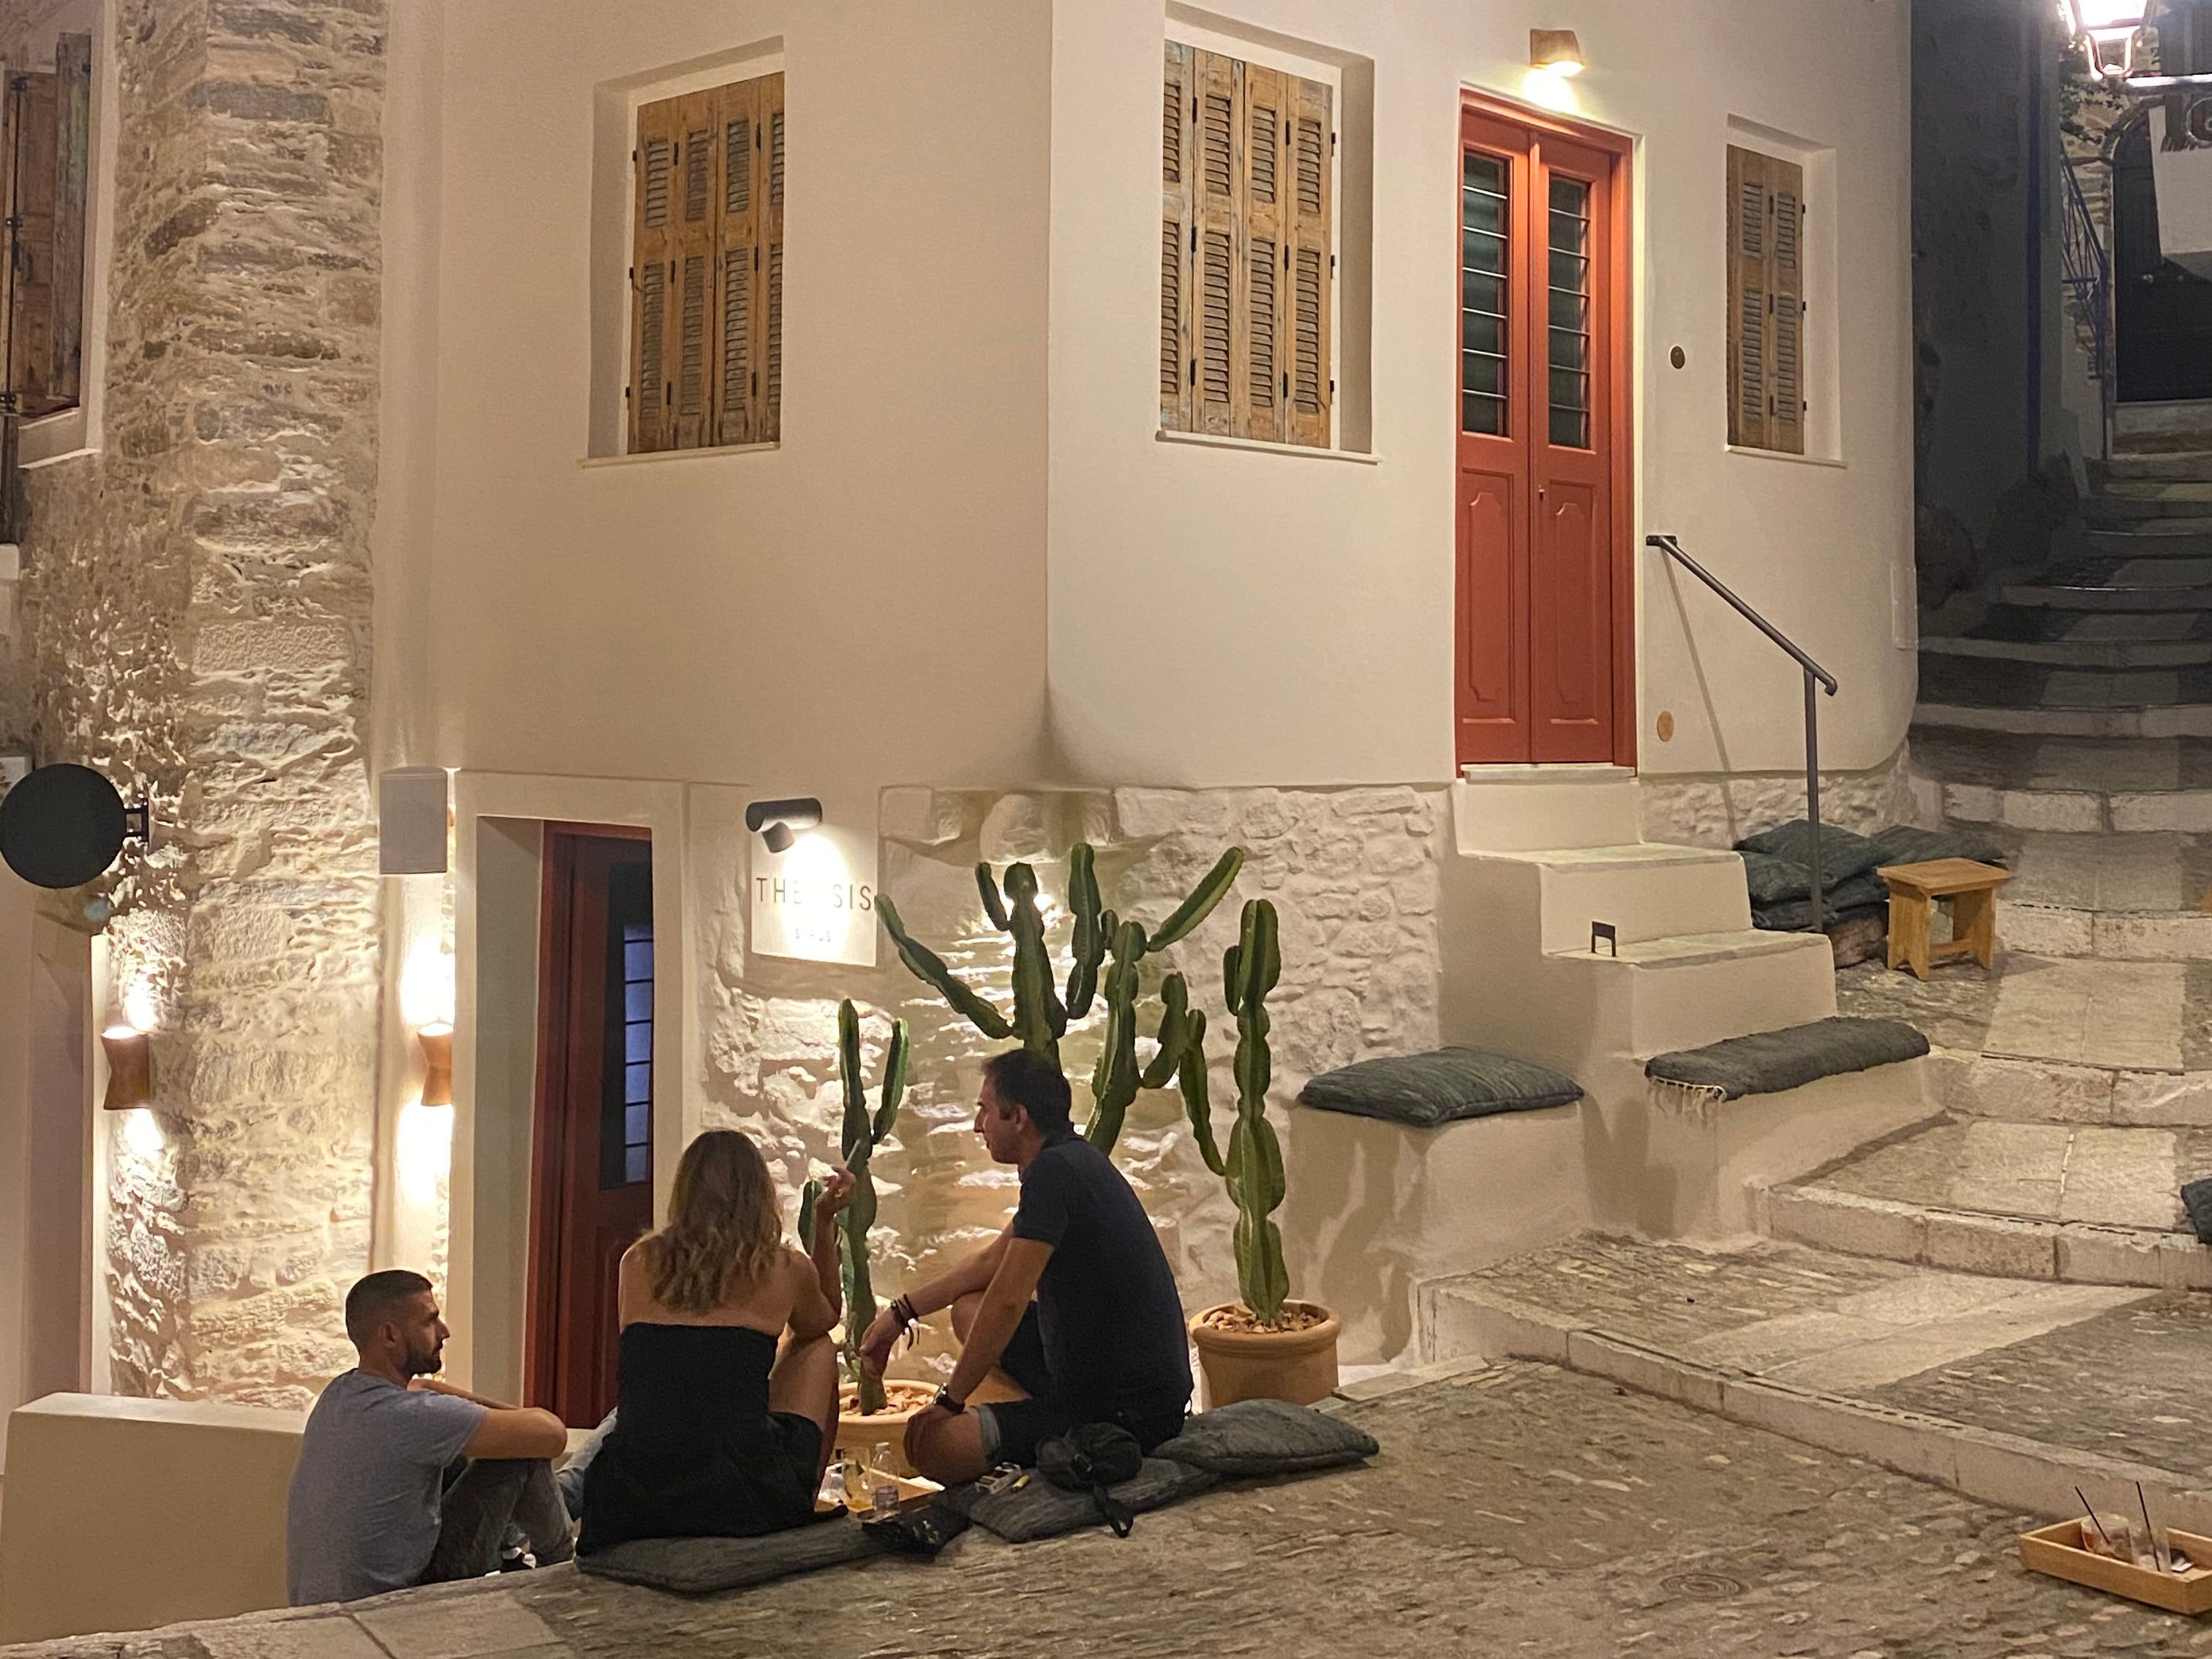 <p>Theosis Bar is a newer addition to Ano Syros. It's o<span>wned by the same man who operates Kouchico — one of the </span><a href="https://www.businessinsider.com/best-new-york-city-bars-impress-clients"><span>best cocktail bars</span></a><span> in Ermoupoli — and serves carefully curated and crafted drinks.</span></p><p><span>Instead of tables, people sit around a pedestrianized square on stairs and cushions, making the upscale atmosphere feel more casual and less stuffy.</span></p>